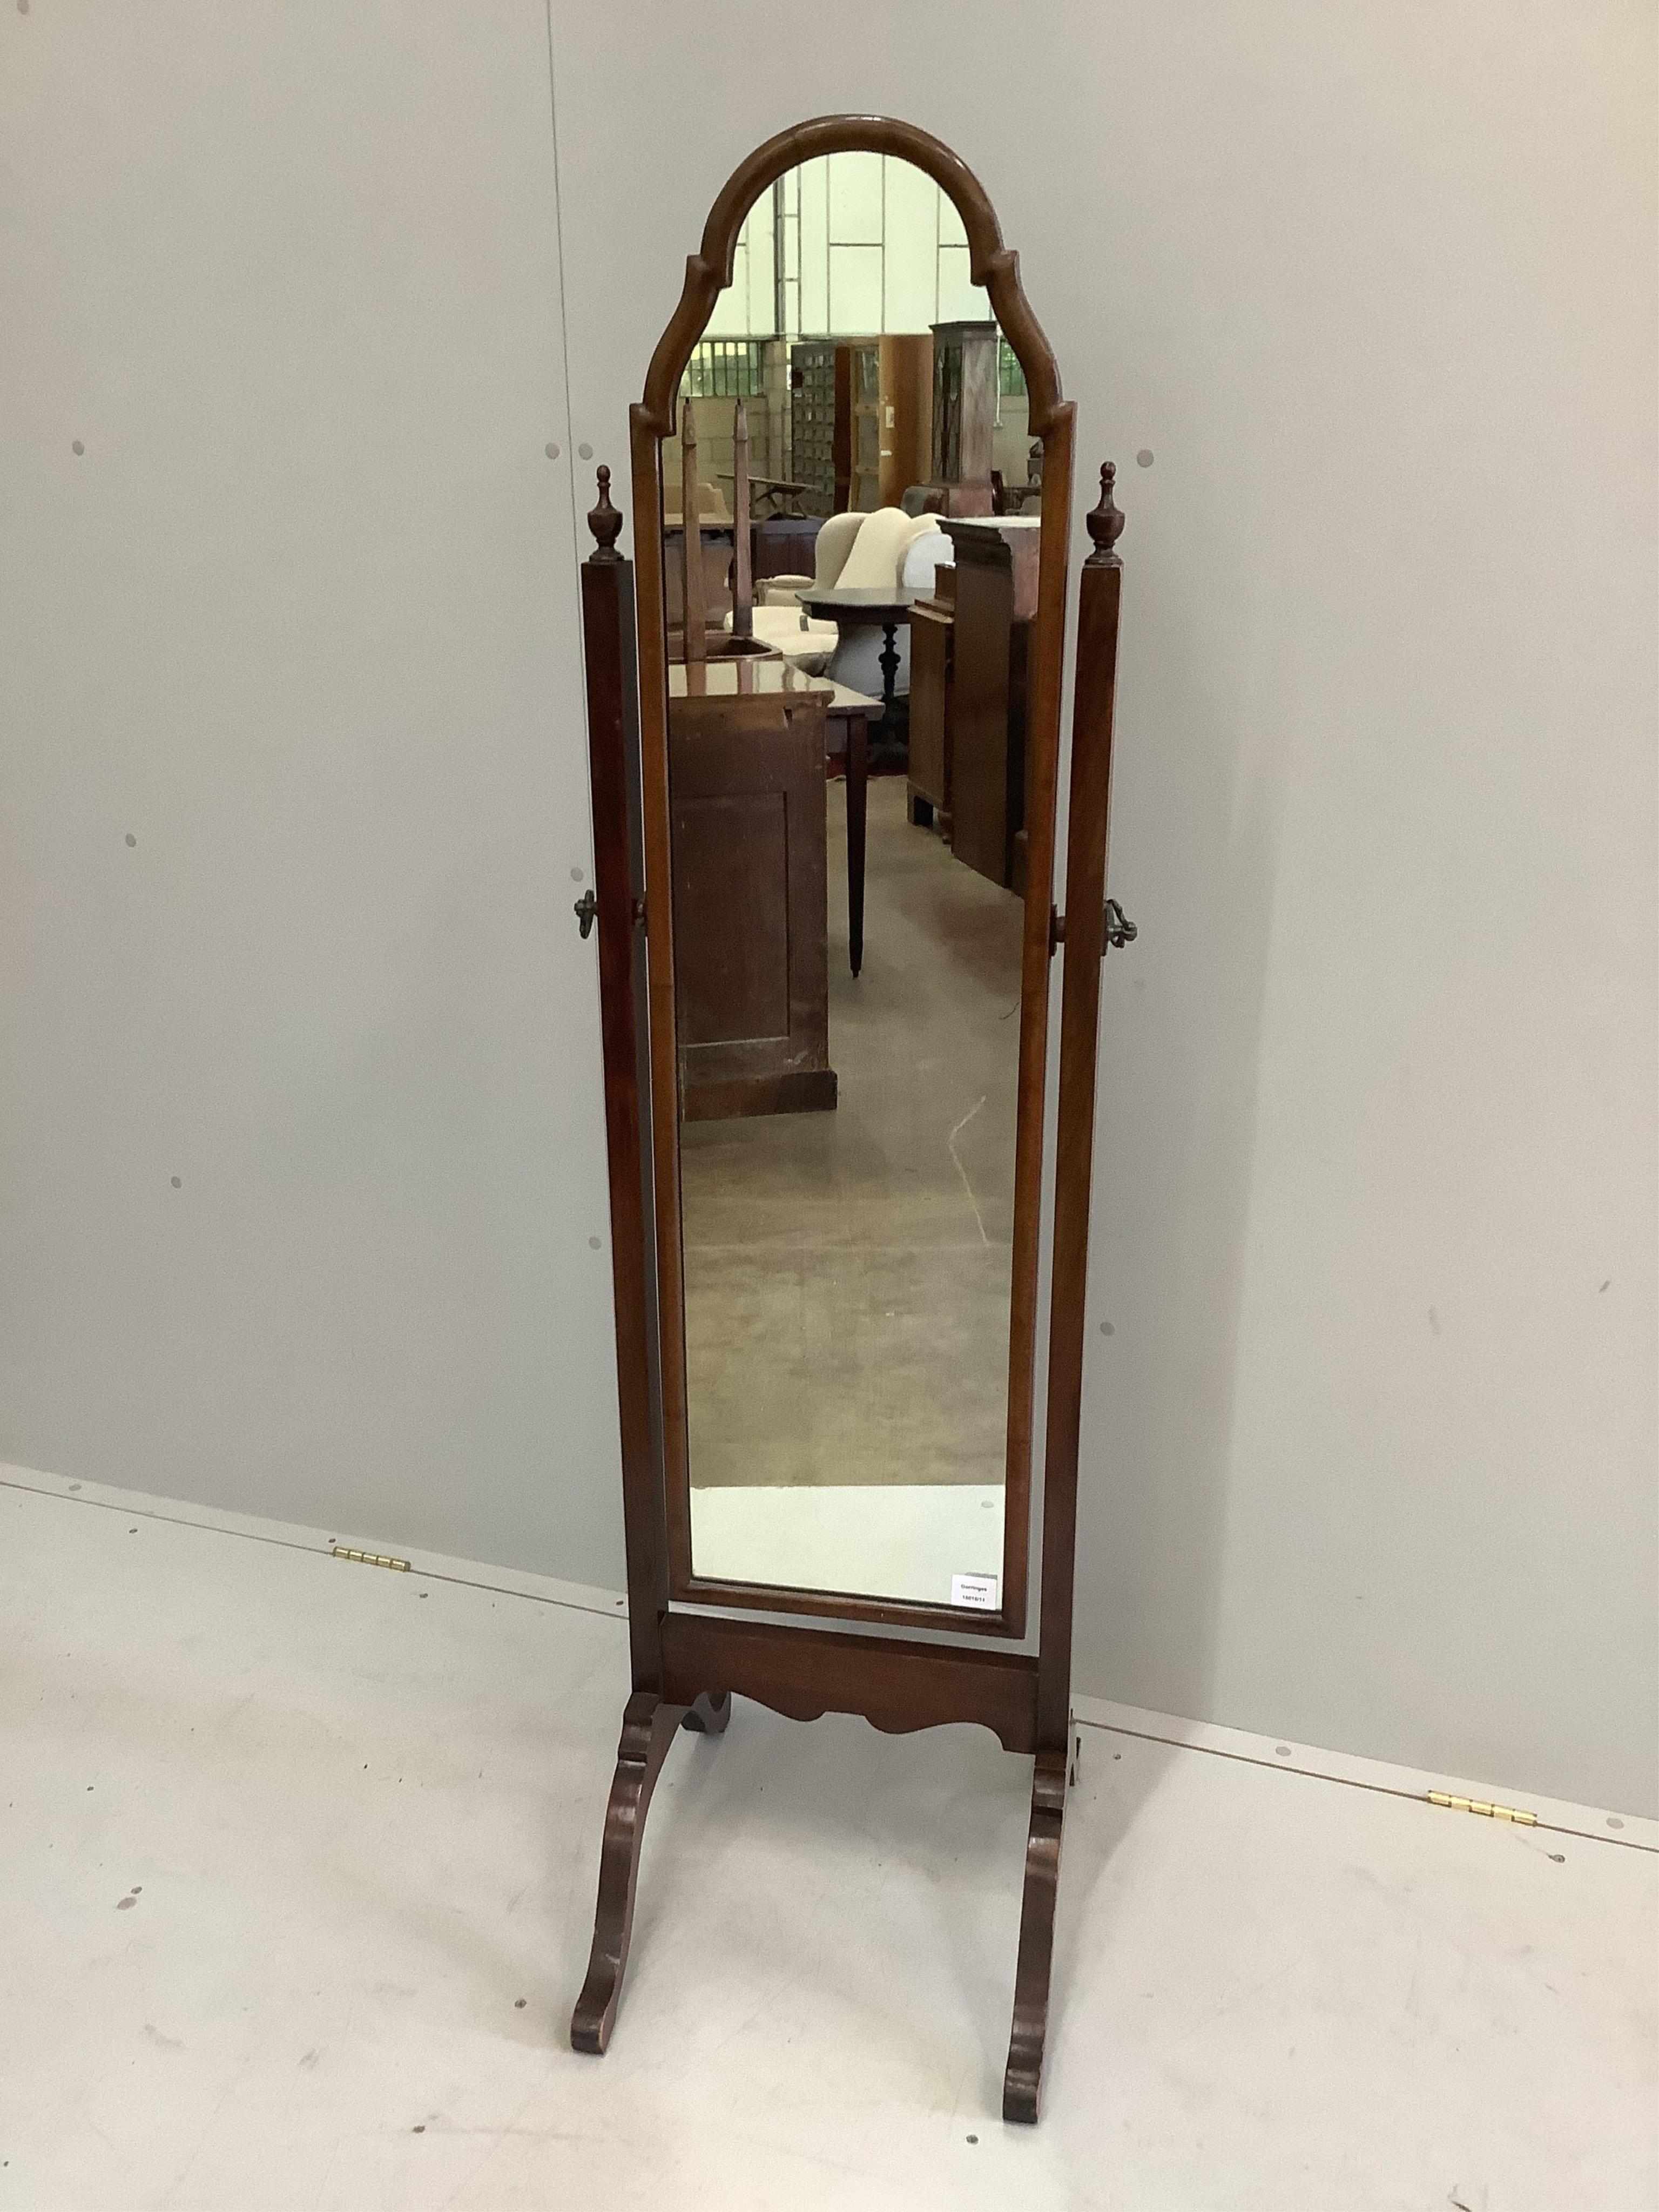 An early 20th century mahogany cheval mirror, width 46cm, height 158cm. Condition - fair